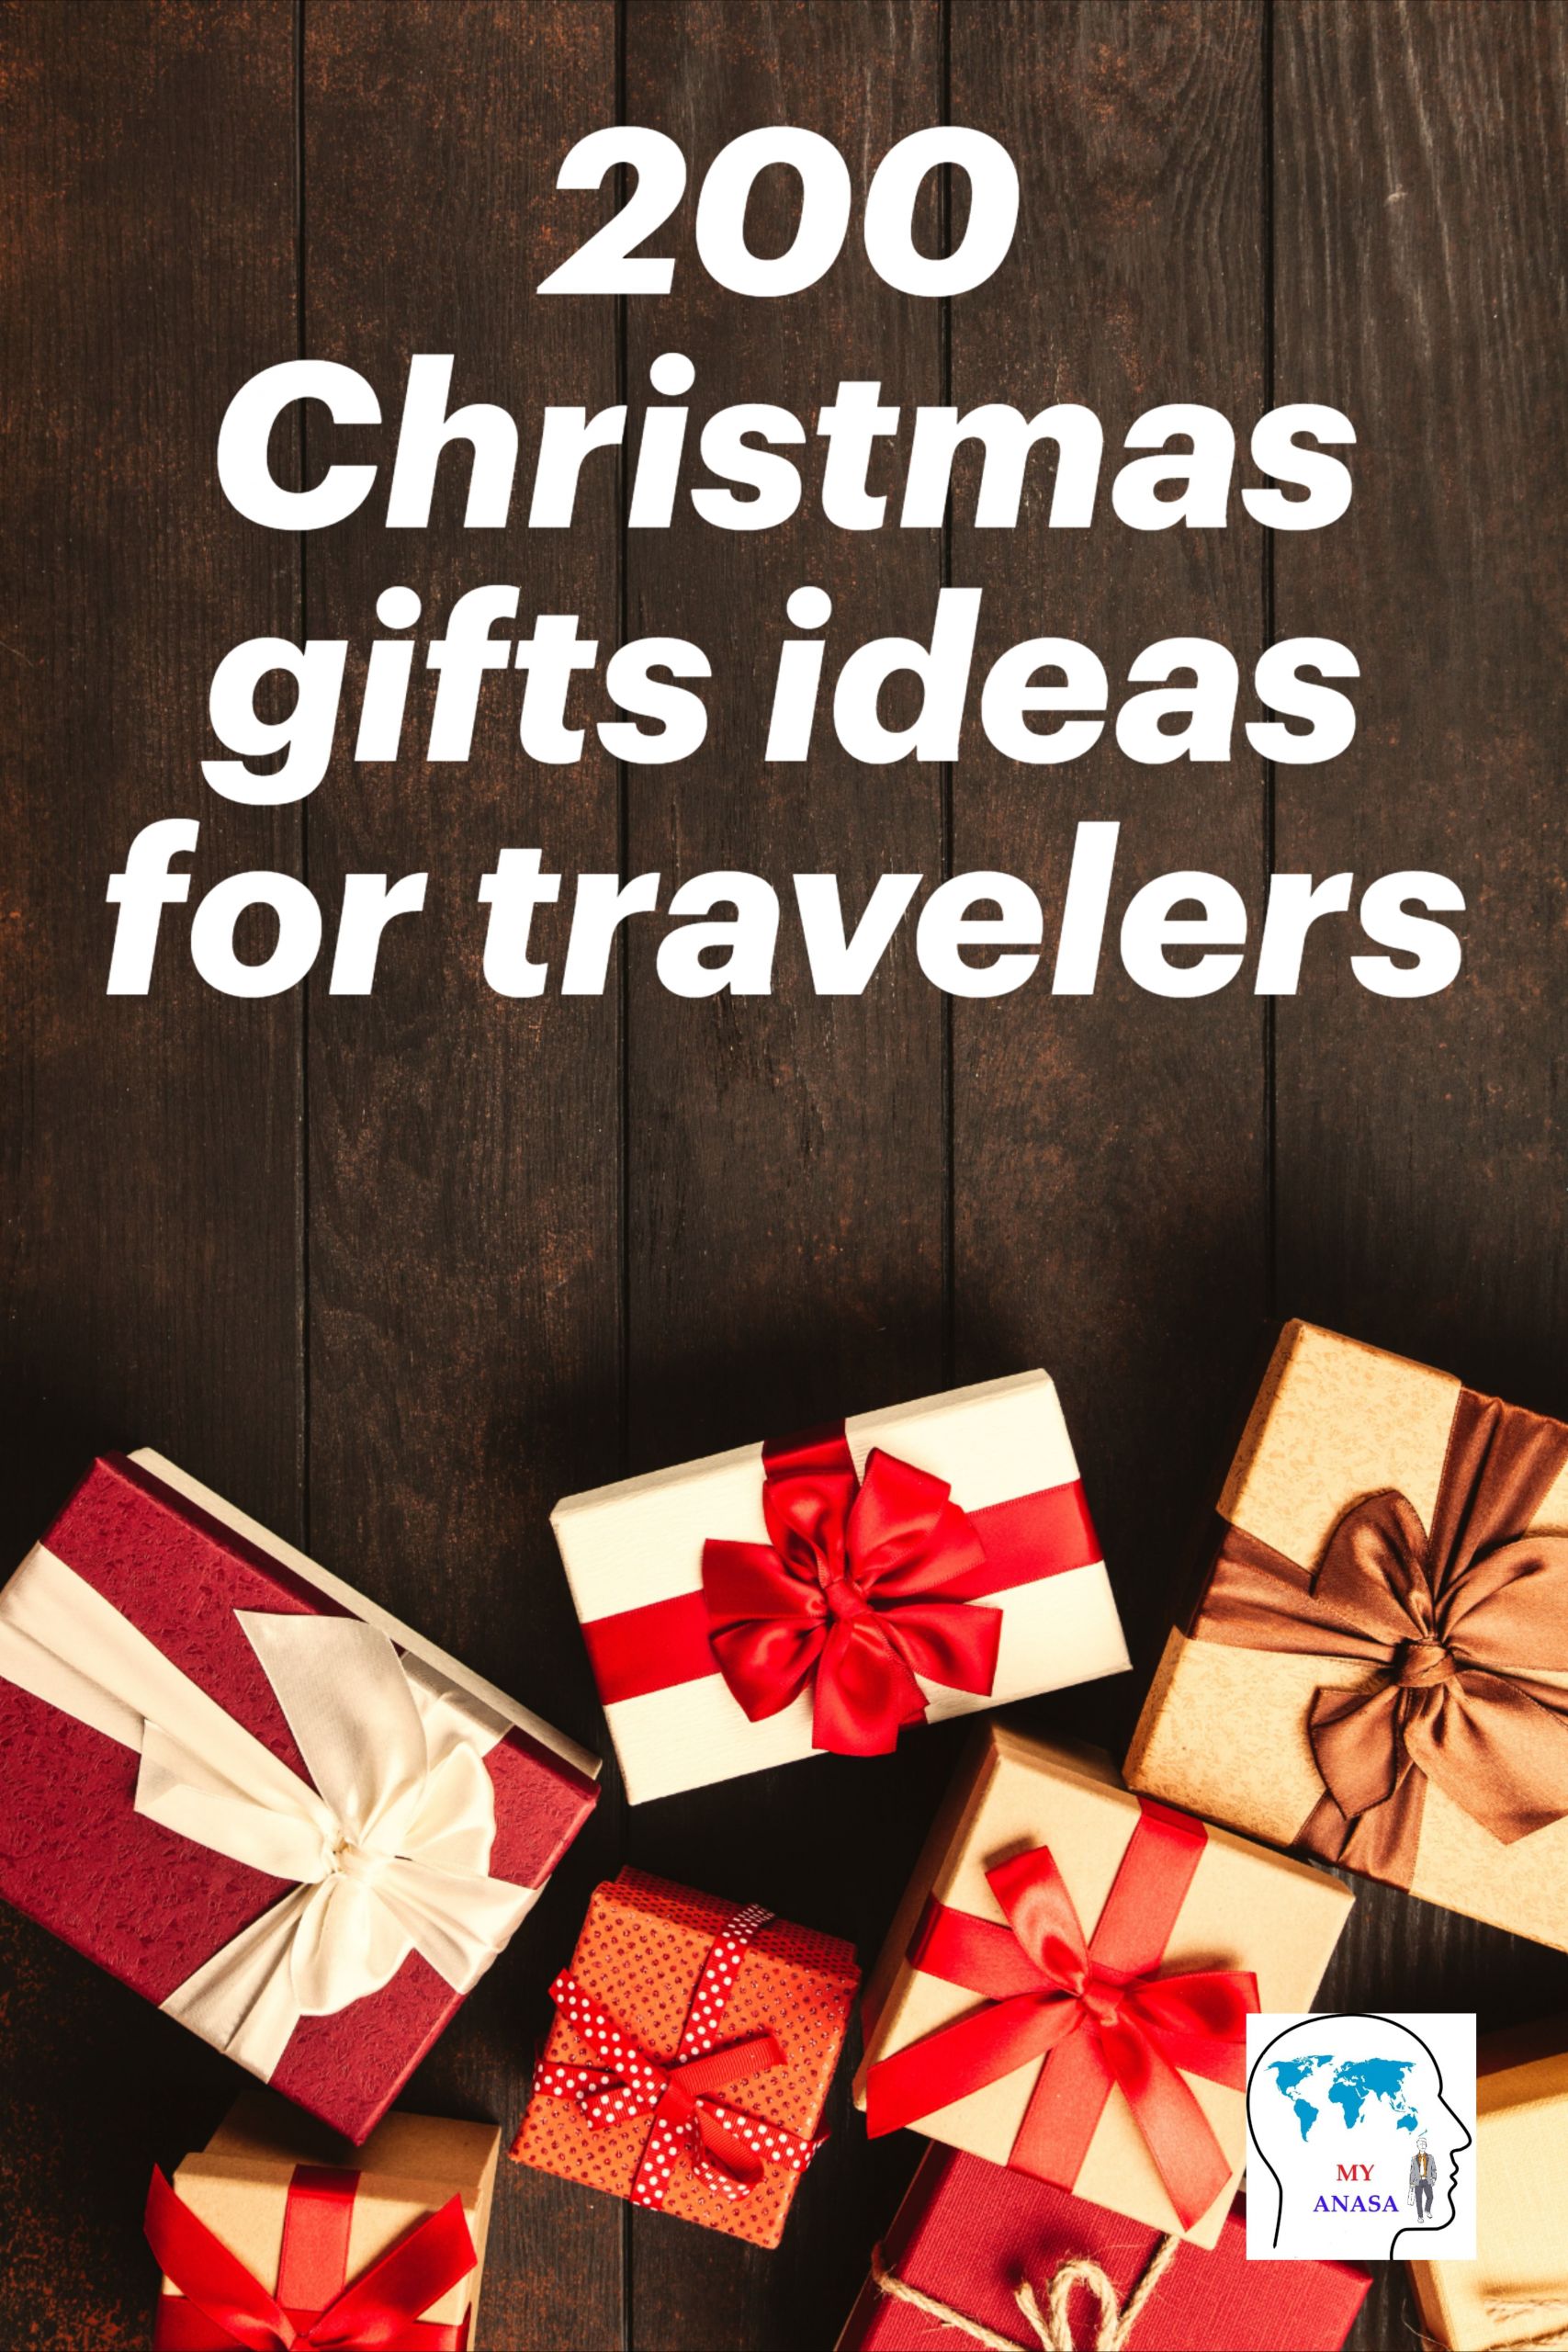 Amazon Christmas Gift Ideas
 I selected 200 Christmas t ideas for travelers on